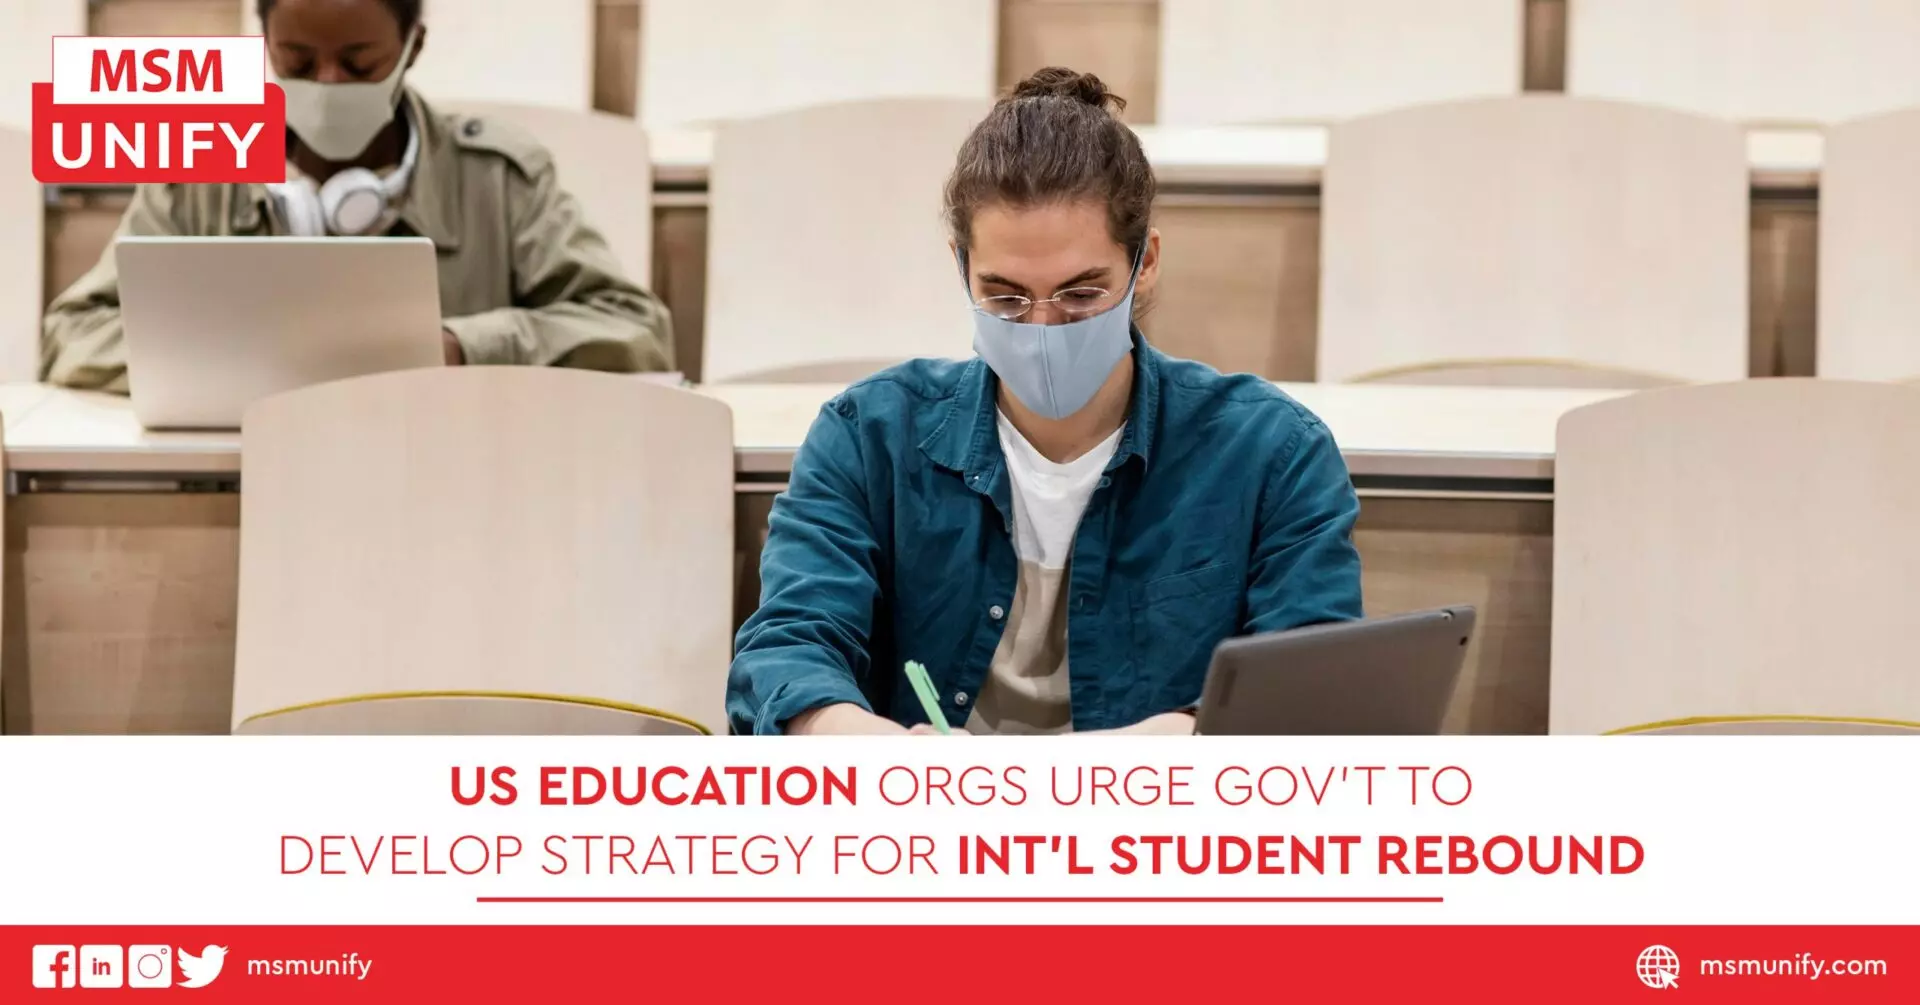 US Education Orgs Urge Govt To Develop Strategy for Intl Student Rebound scaled 1